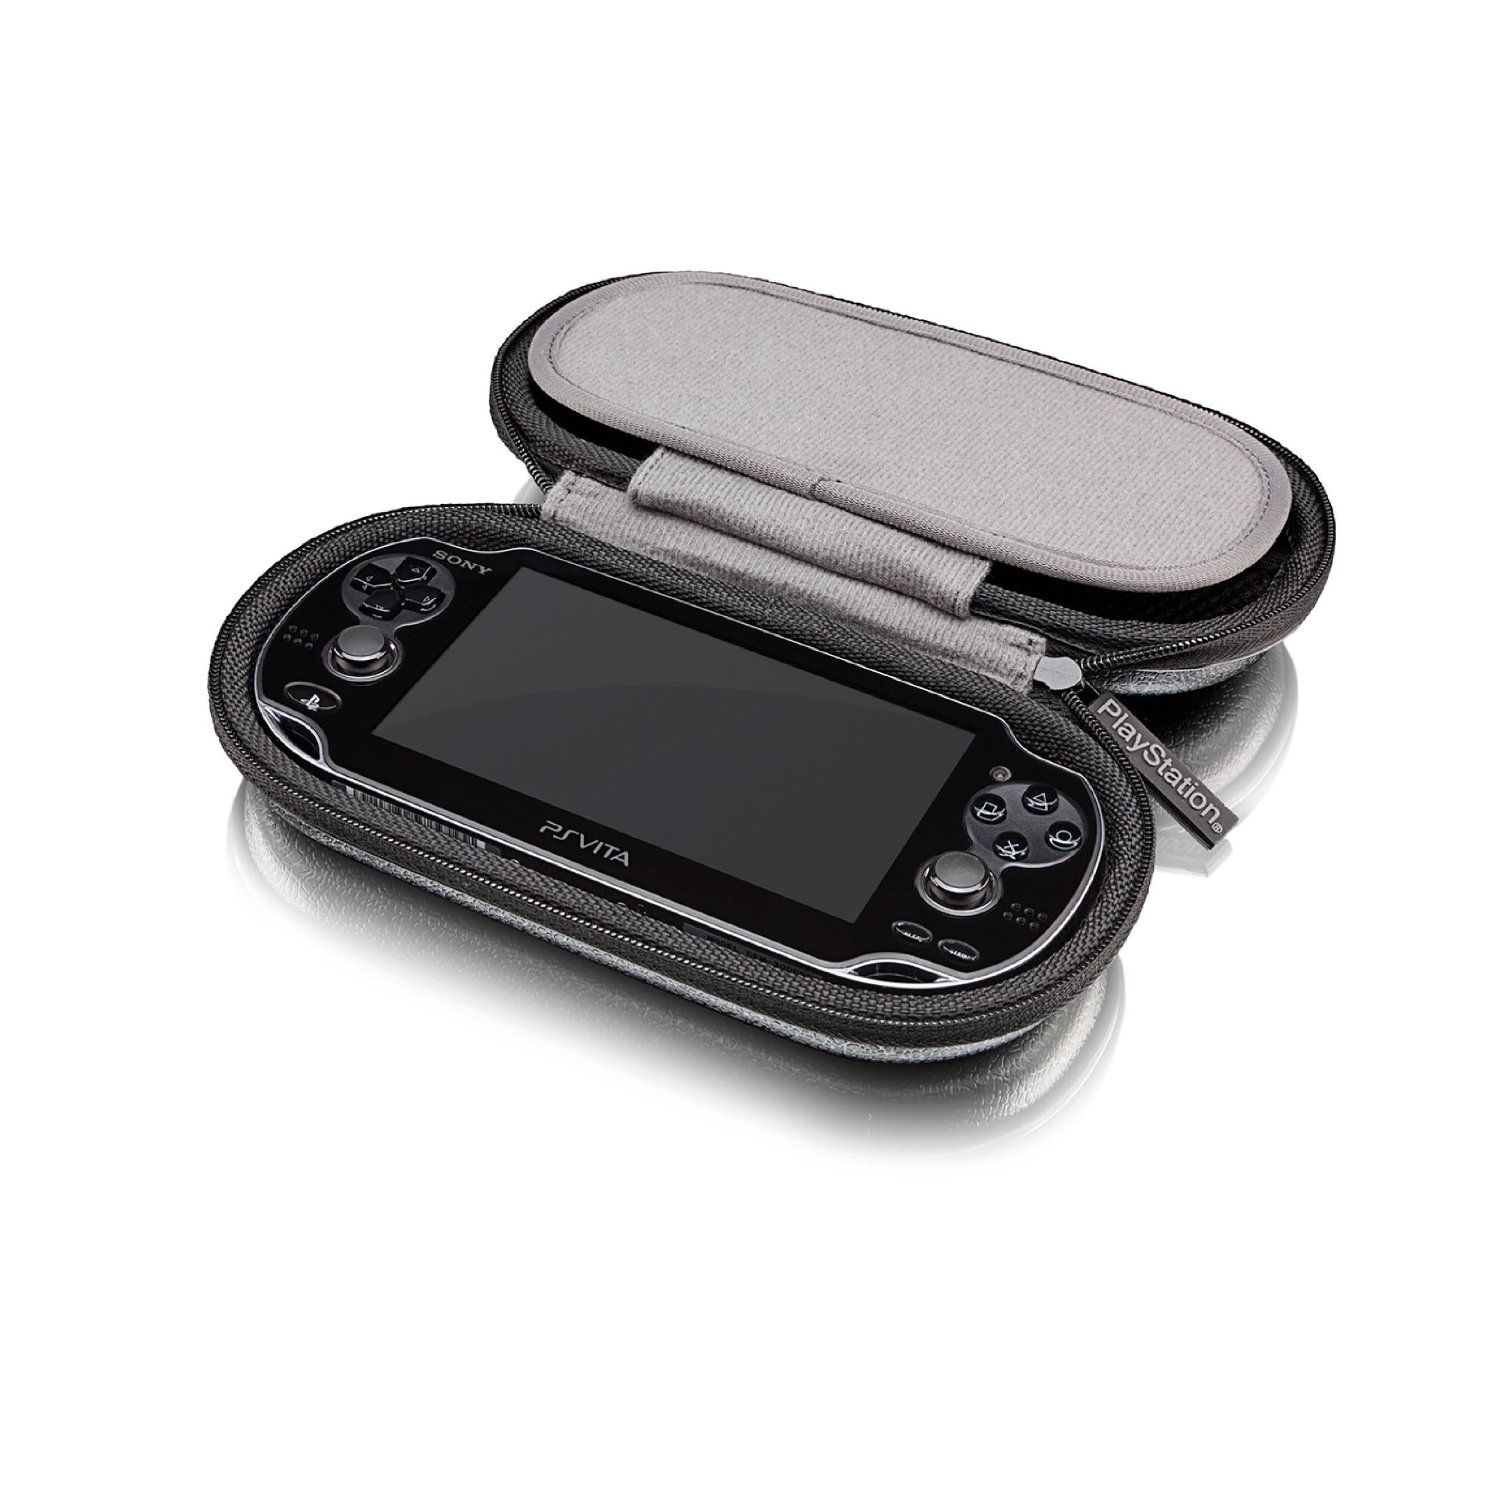 Games Console and Gadget Review: PlayStation Vita First Edition Bundle